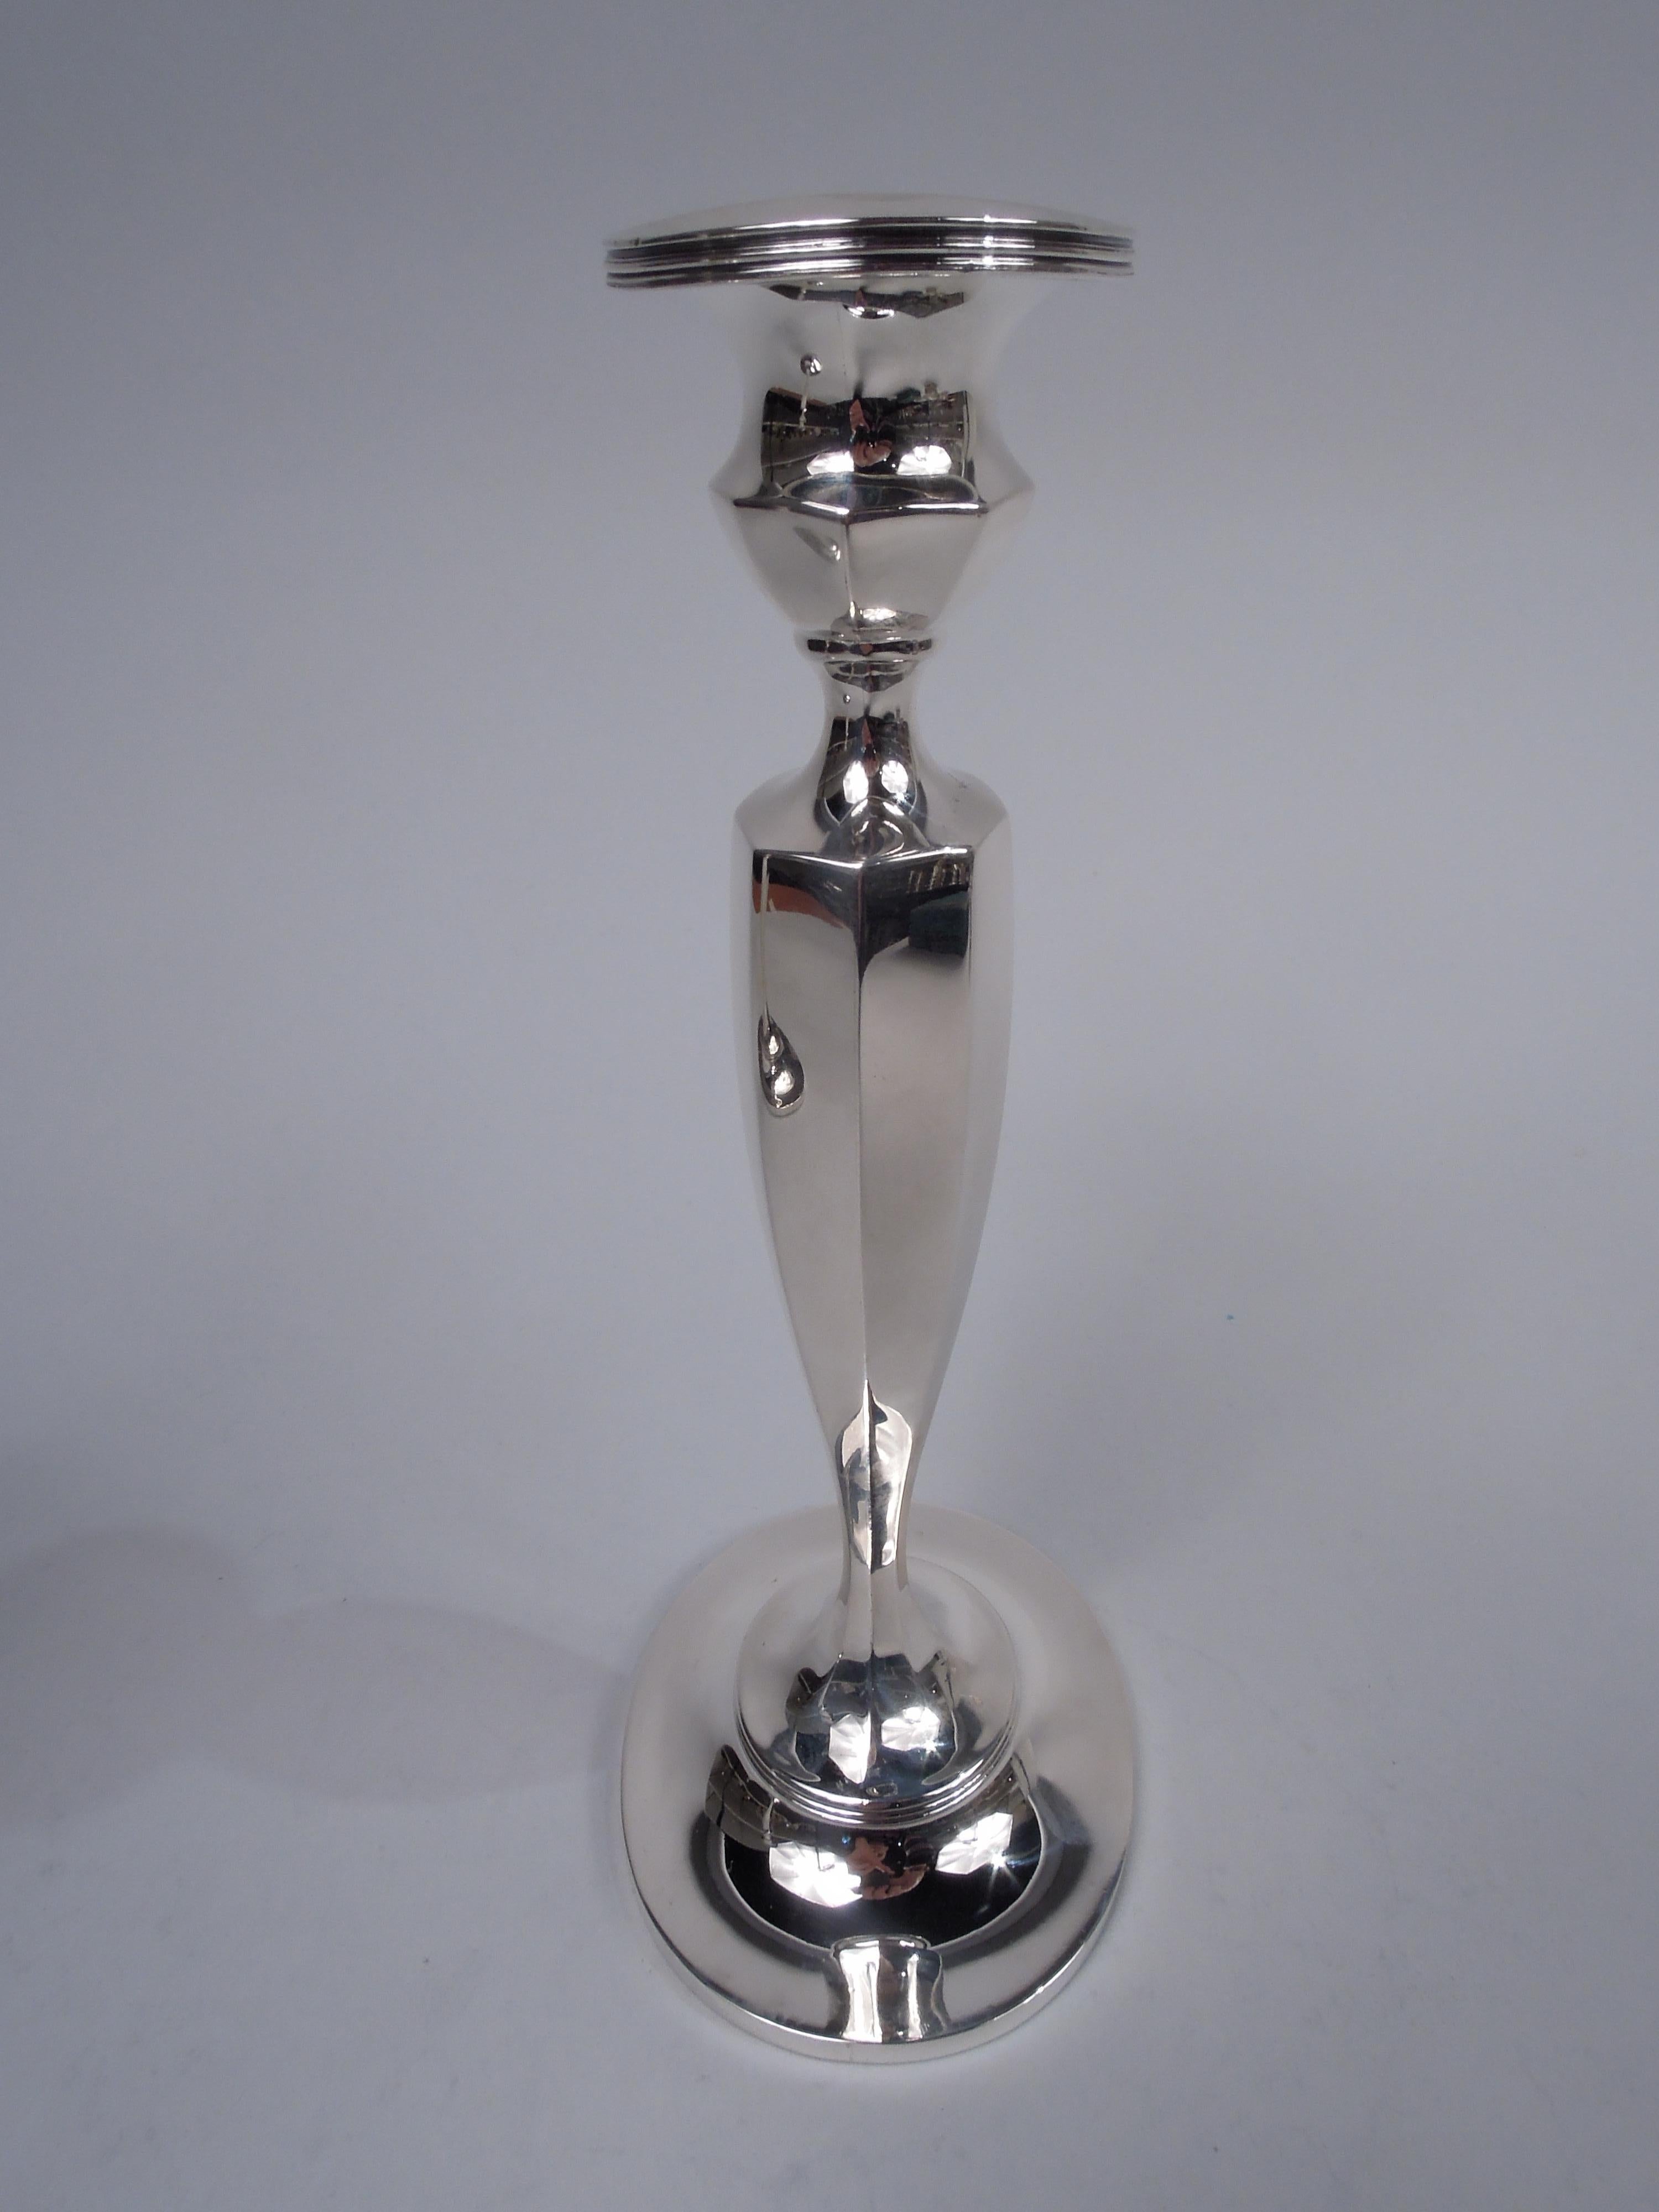 Pair of American Edwardian Georgian sterling silver candlesticks, ca 1910. Retailed by Tiffany & Co. in New York. Bellied socket with bobeche on tapering shaft mounted to domed foot. Ovoid, faceted, and reeded. Fully marked including retailer’s